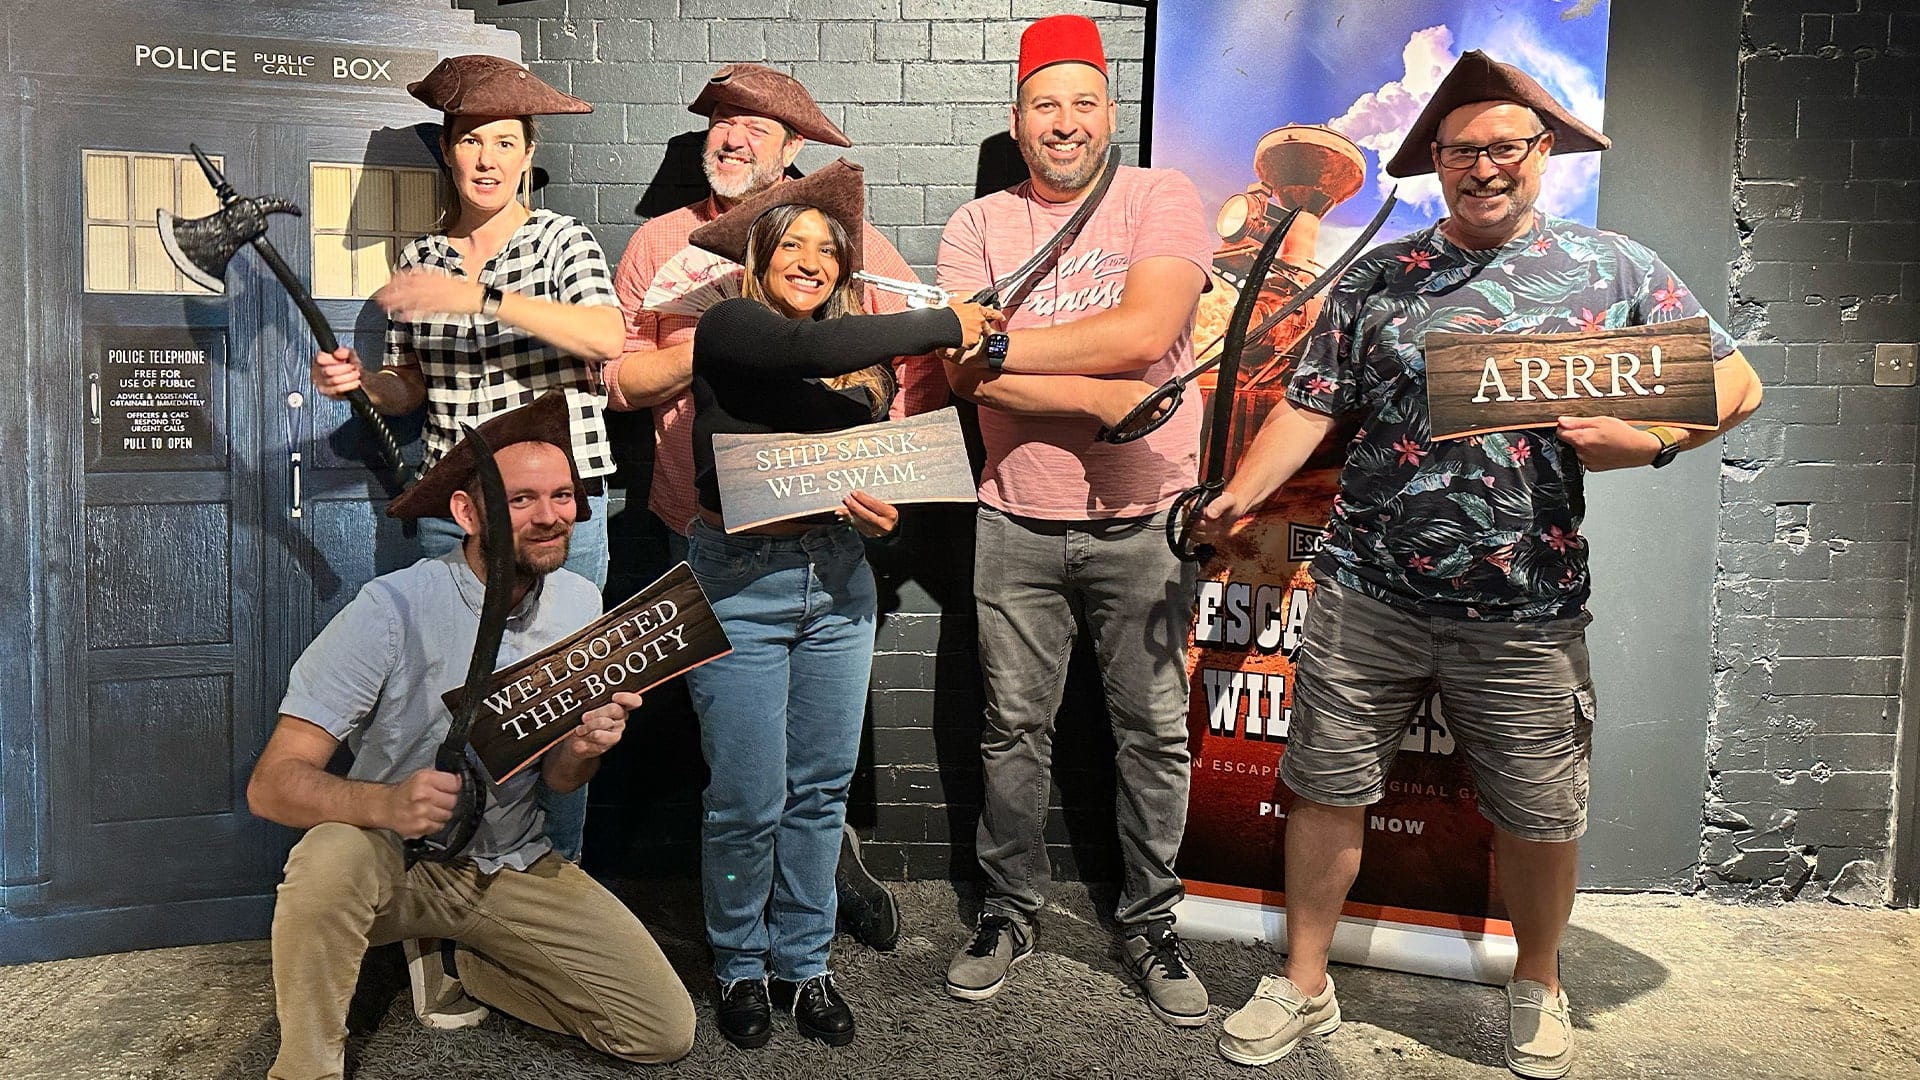 Group photo of the Rocket CRM team dressed up as pirates at an escape room.